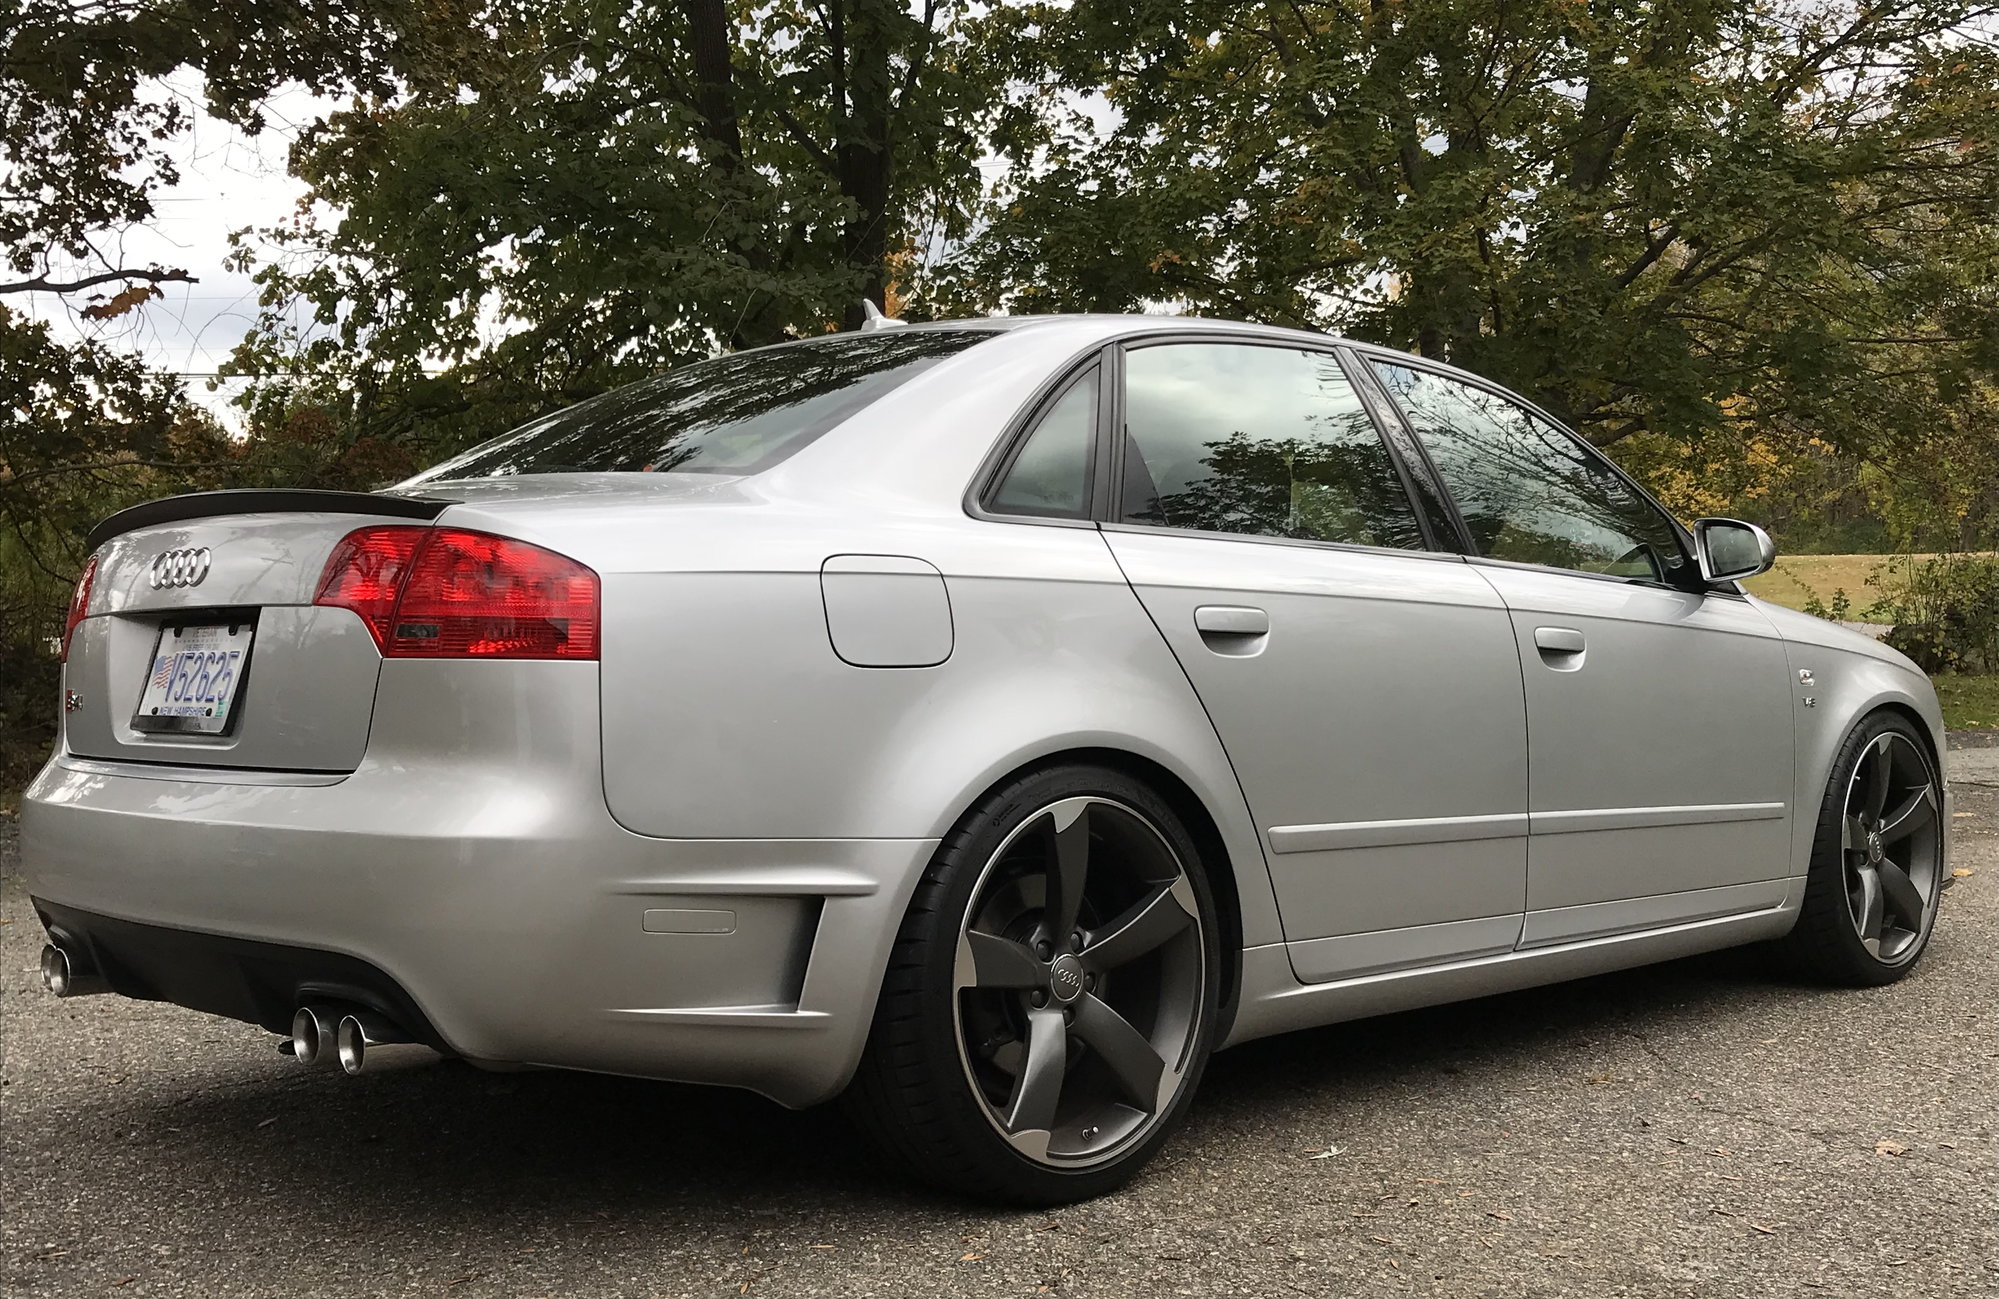 Audi Other FS in NH: Audi B7 S4 w/DTM package - AudiWorld ...